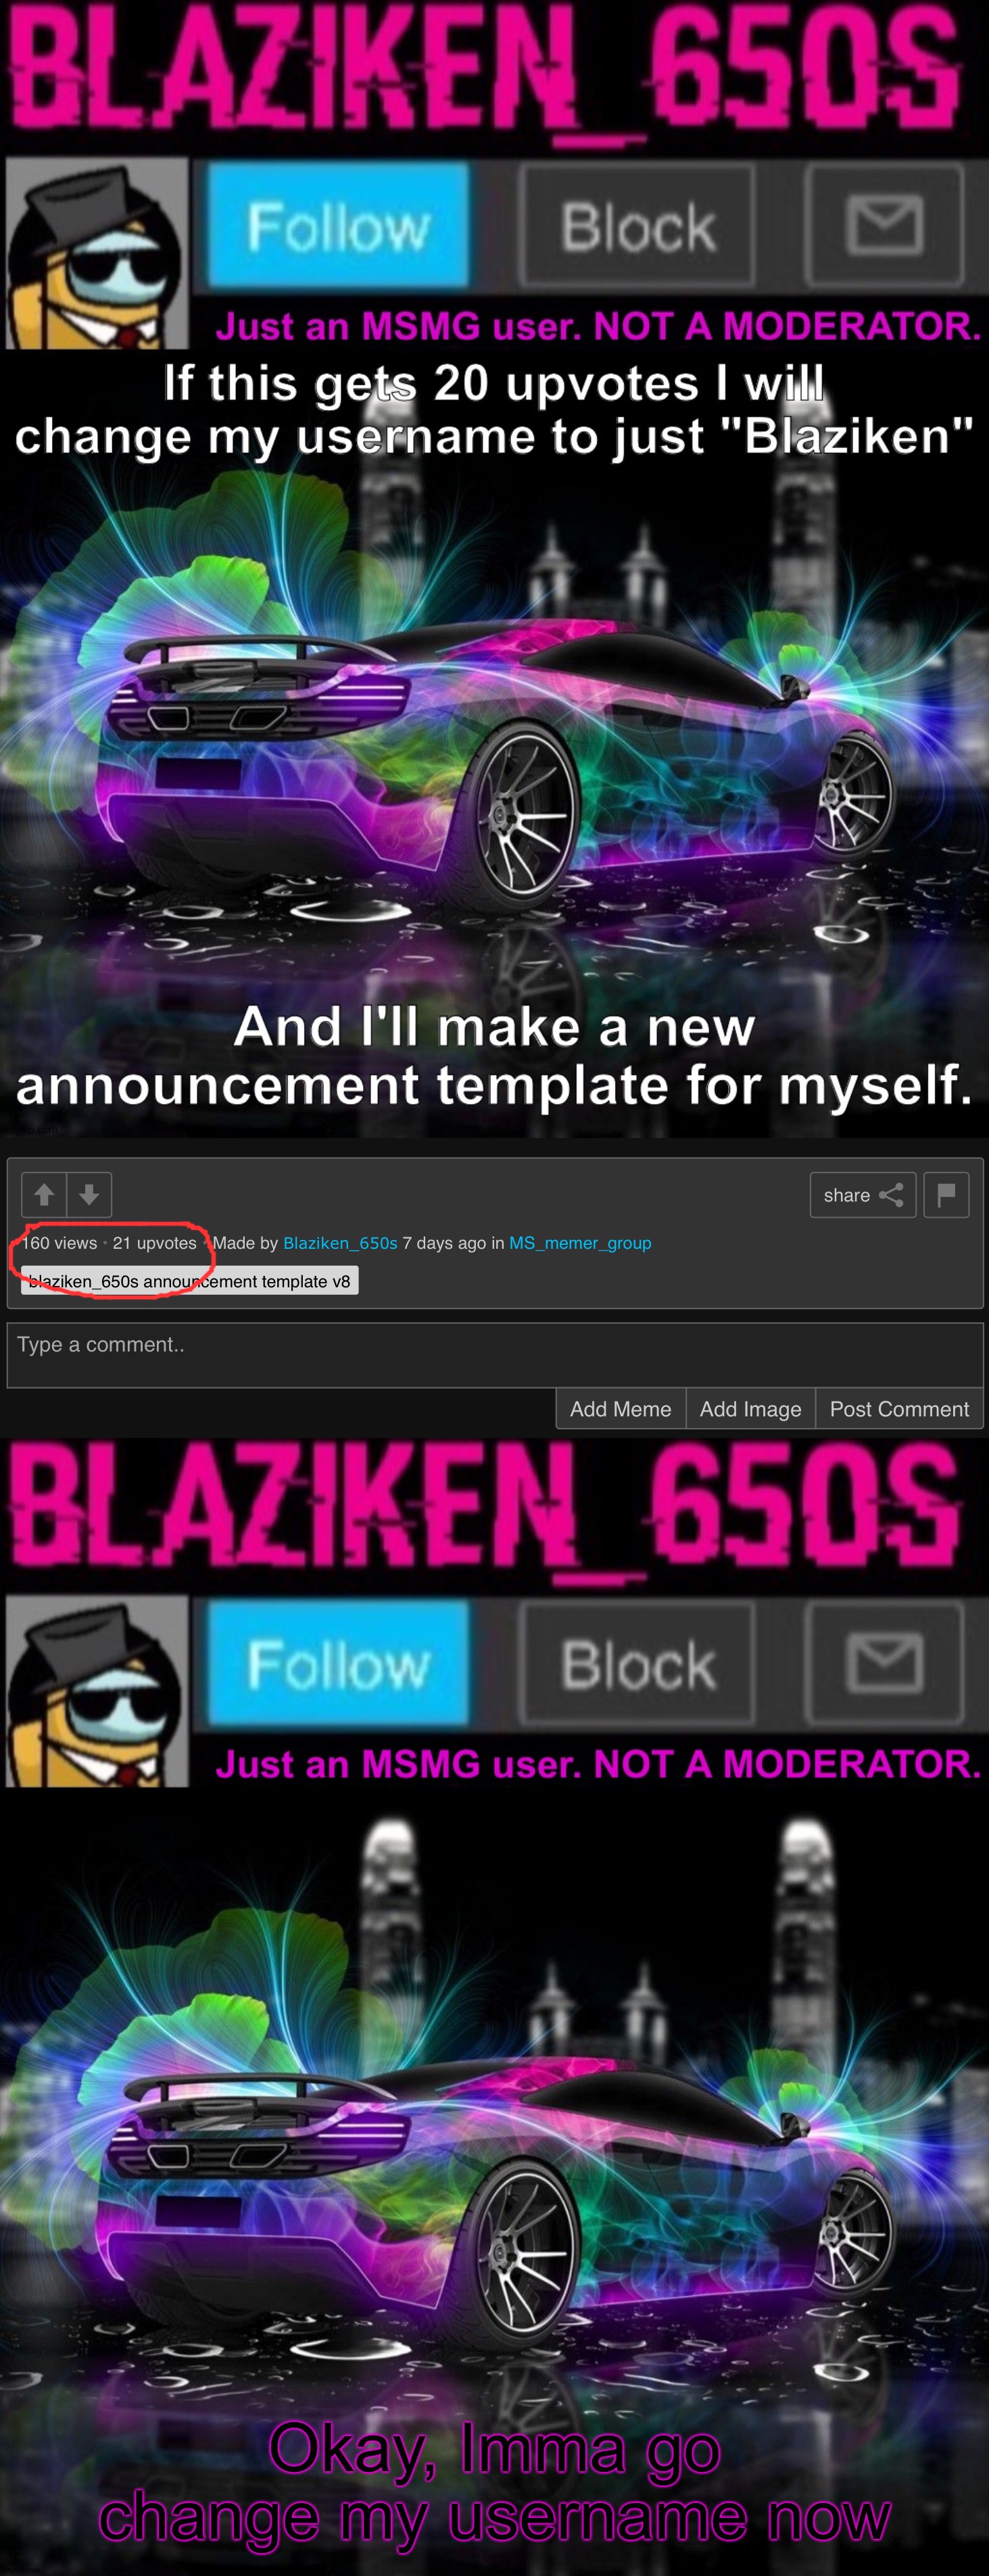 It's finally happening! *starts glowing* | Okay, Imma go change my username now | image tagged in blaziken_650s announcement template v8 | made w/ Imgflip meme maker